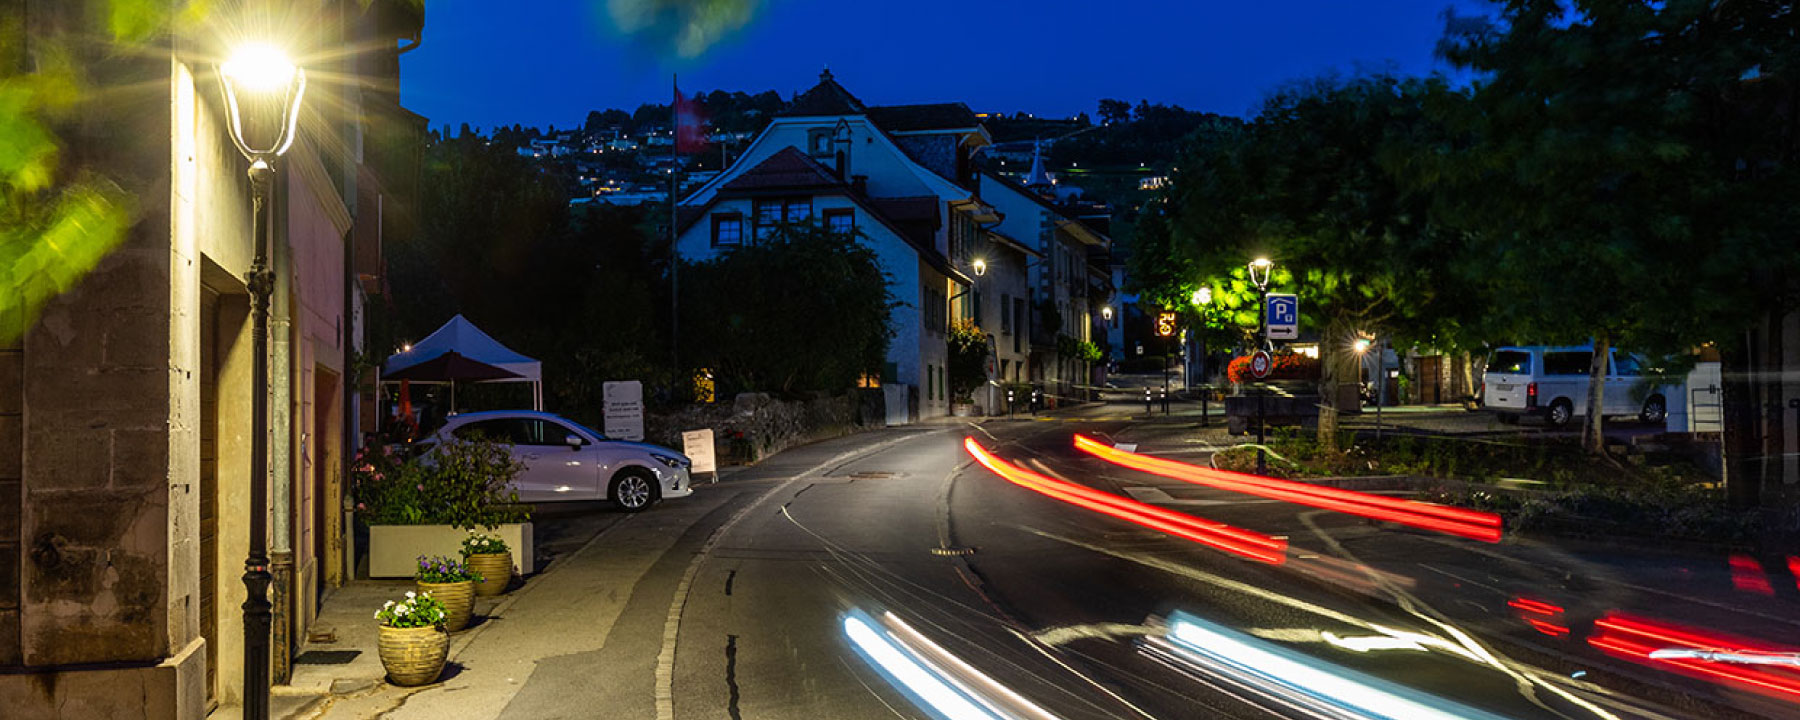 Energy-efficient lighting solutions by Schréder create residential streets where people feel safe at nightensure people feel safe 